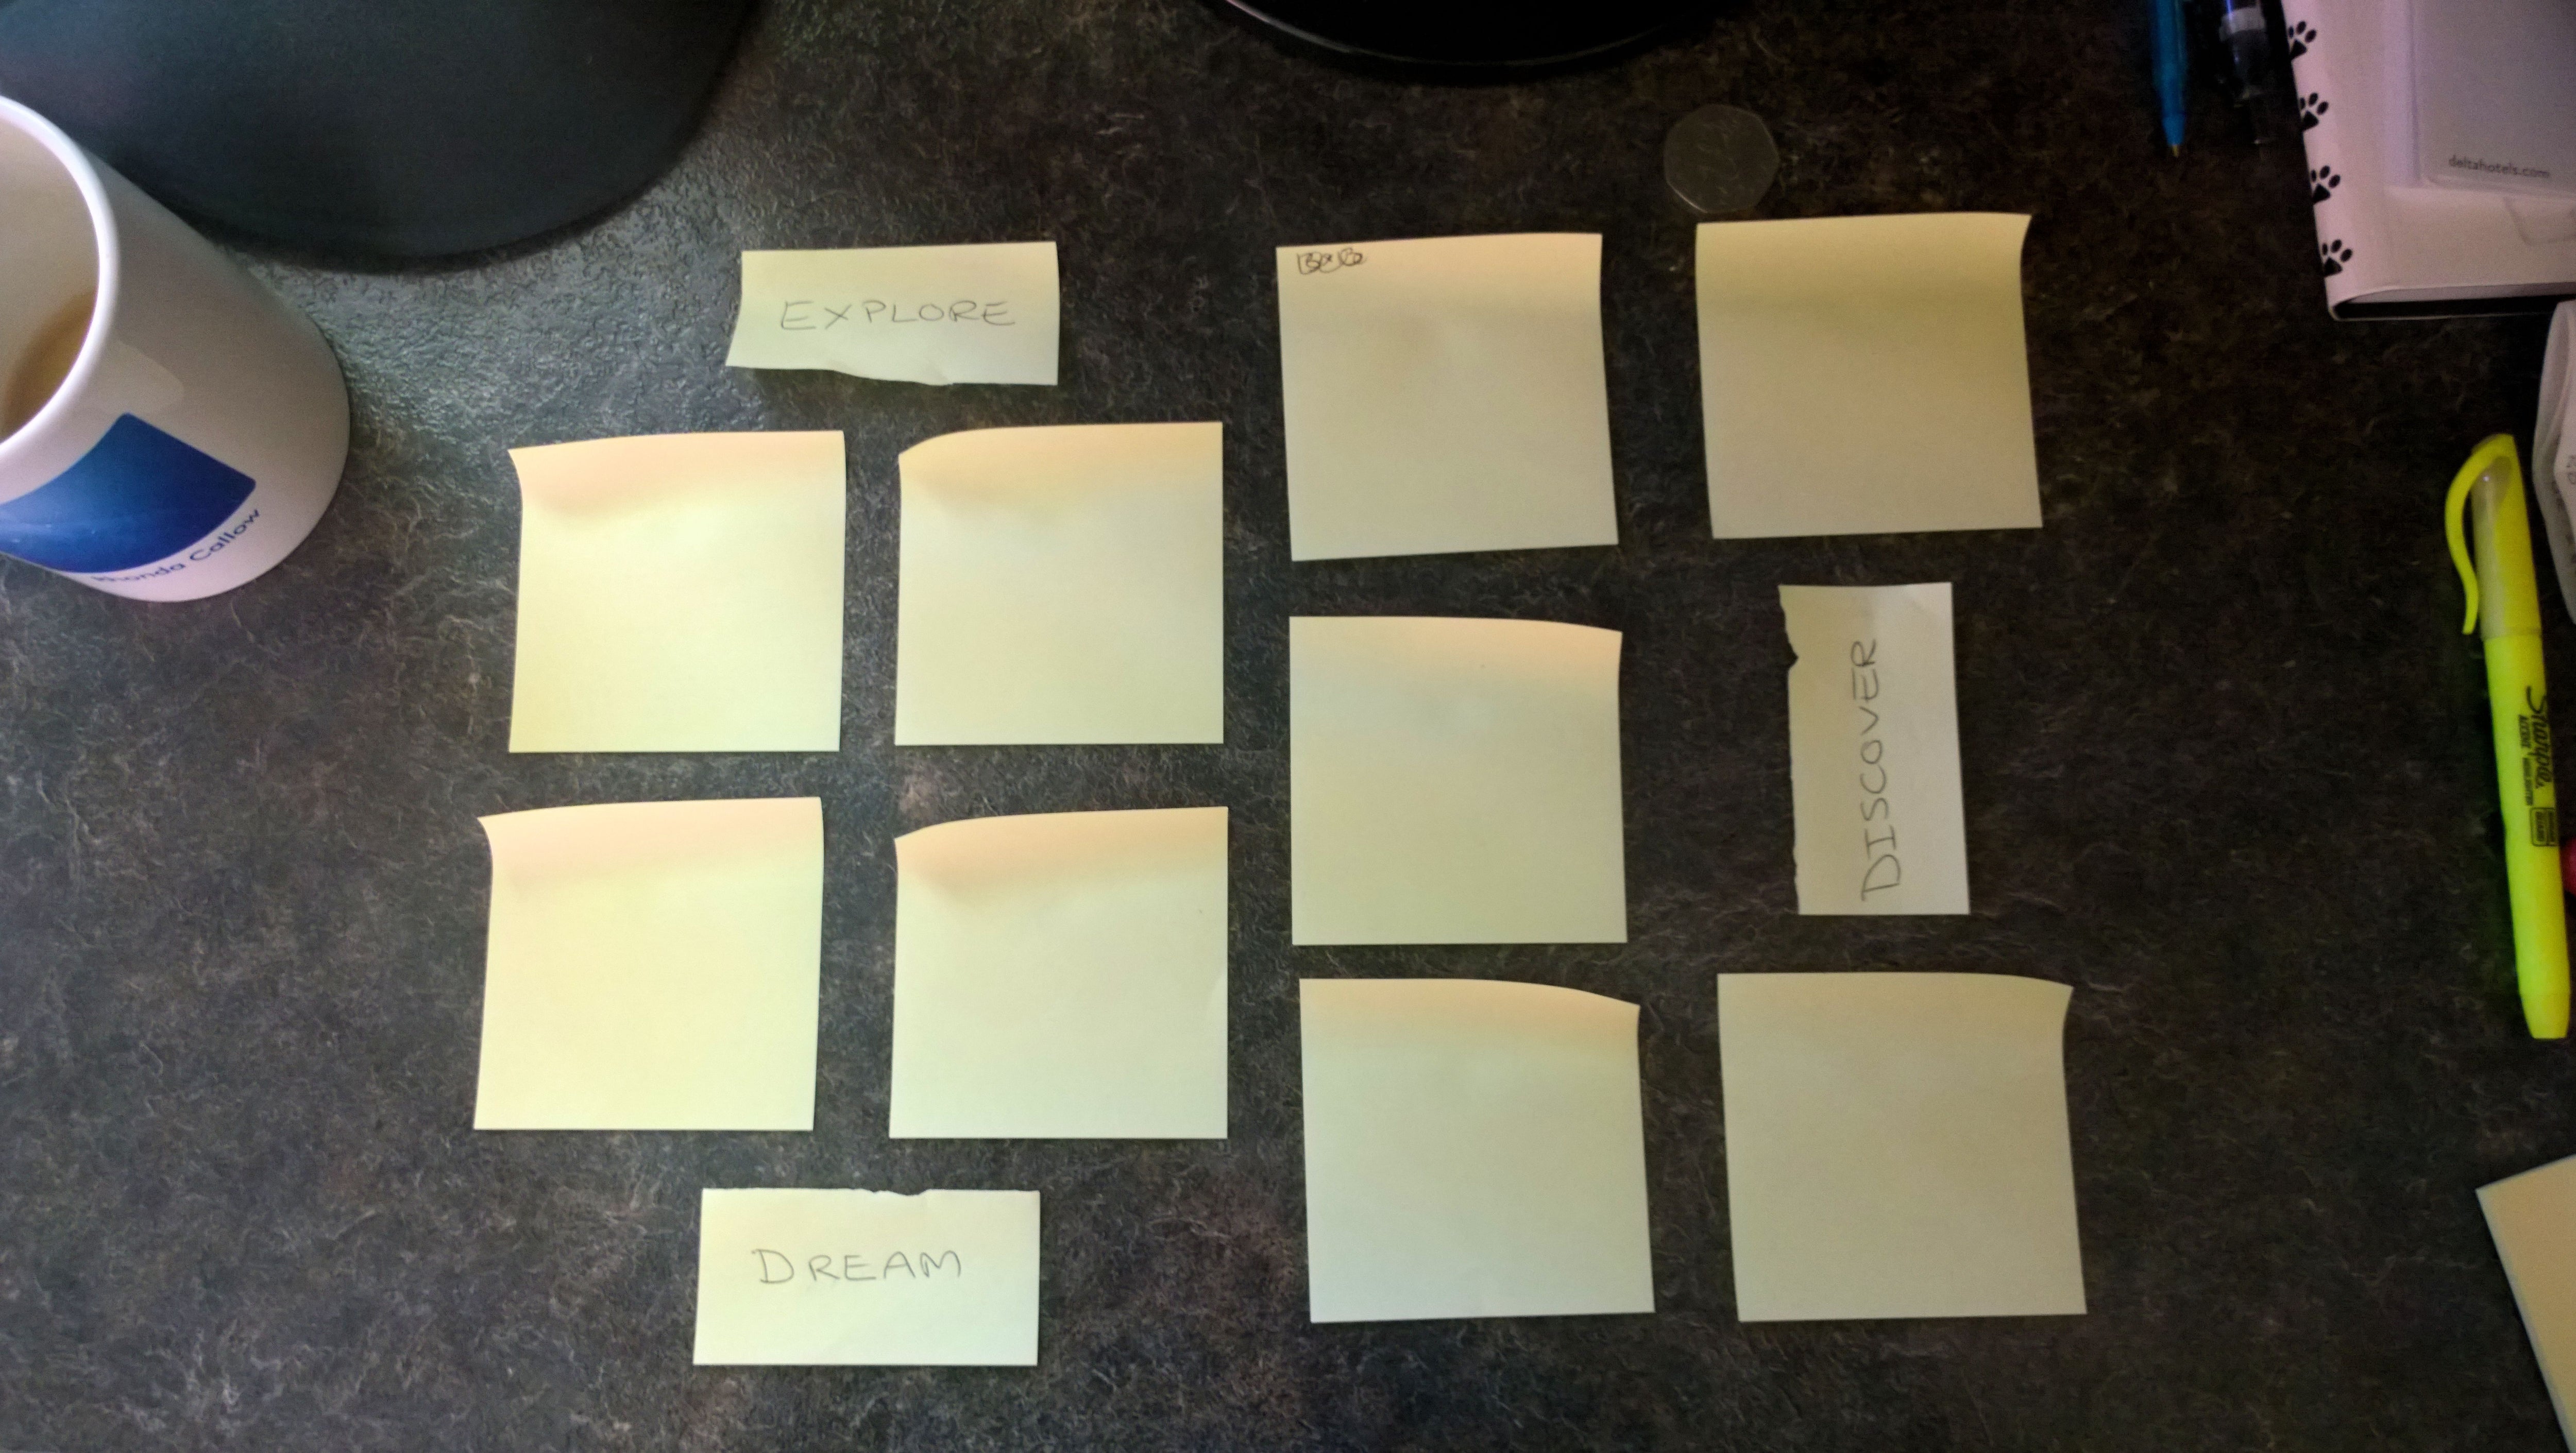 Room makeover project - planning a photo gallery wall with Post-It notes